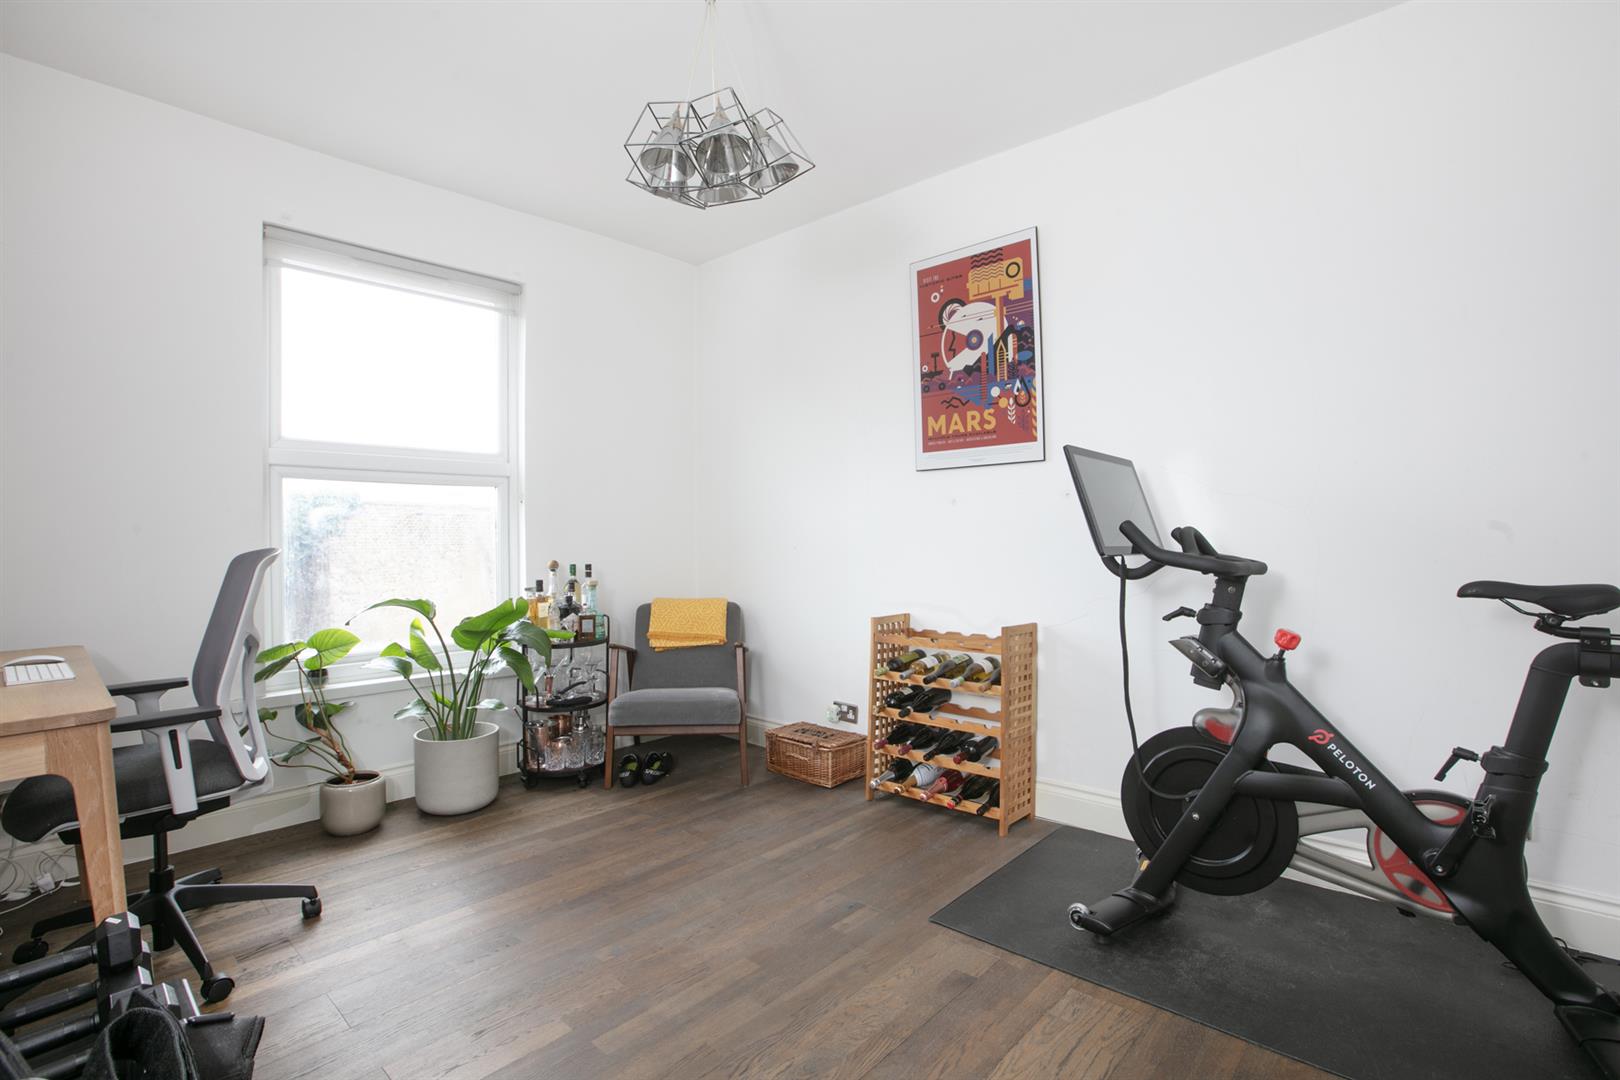 Flat - Conversion For Sale in Coldharbour Lane, Camberwell, SE5 1178 view8